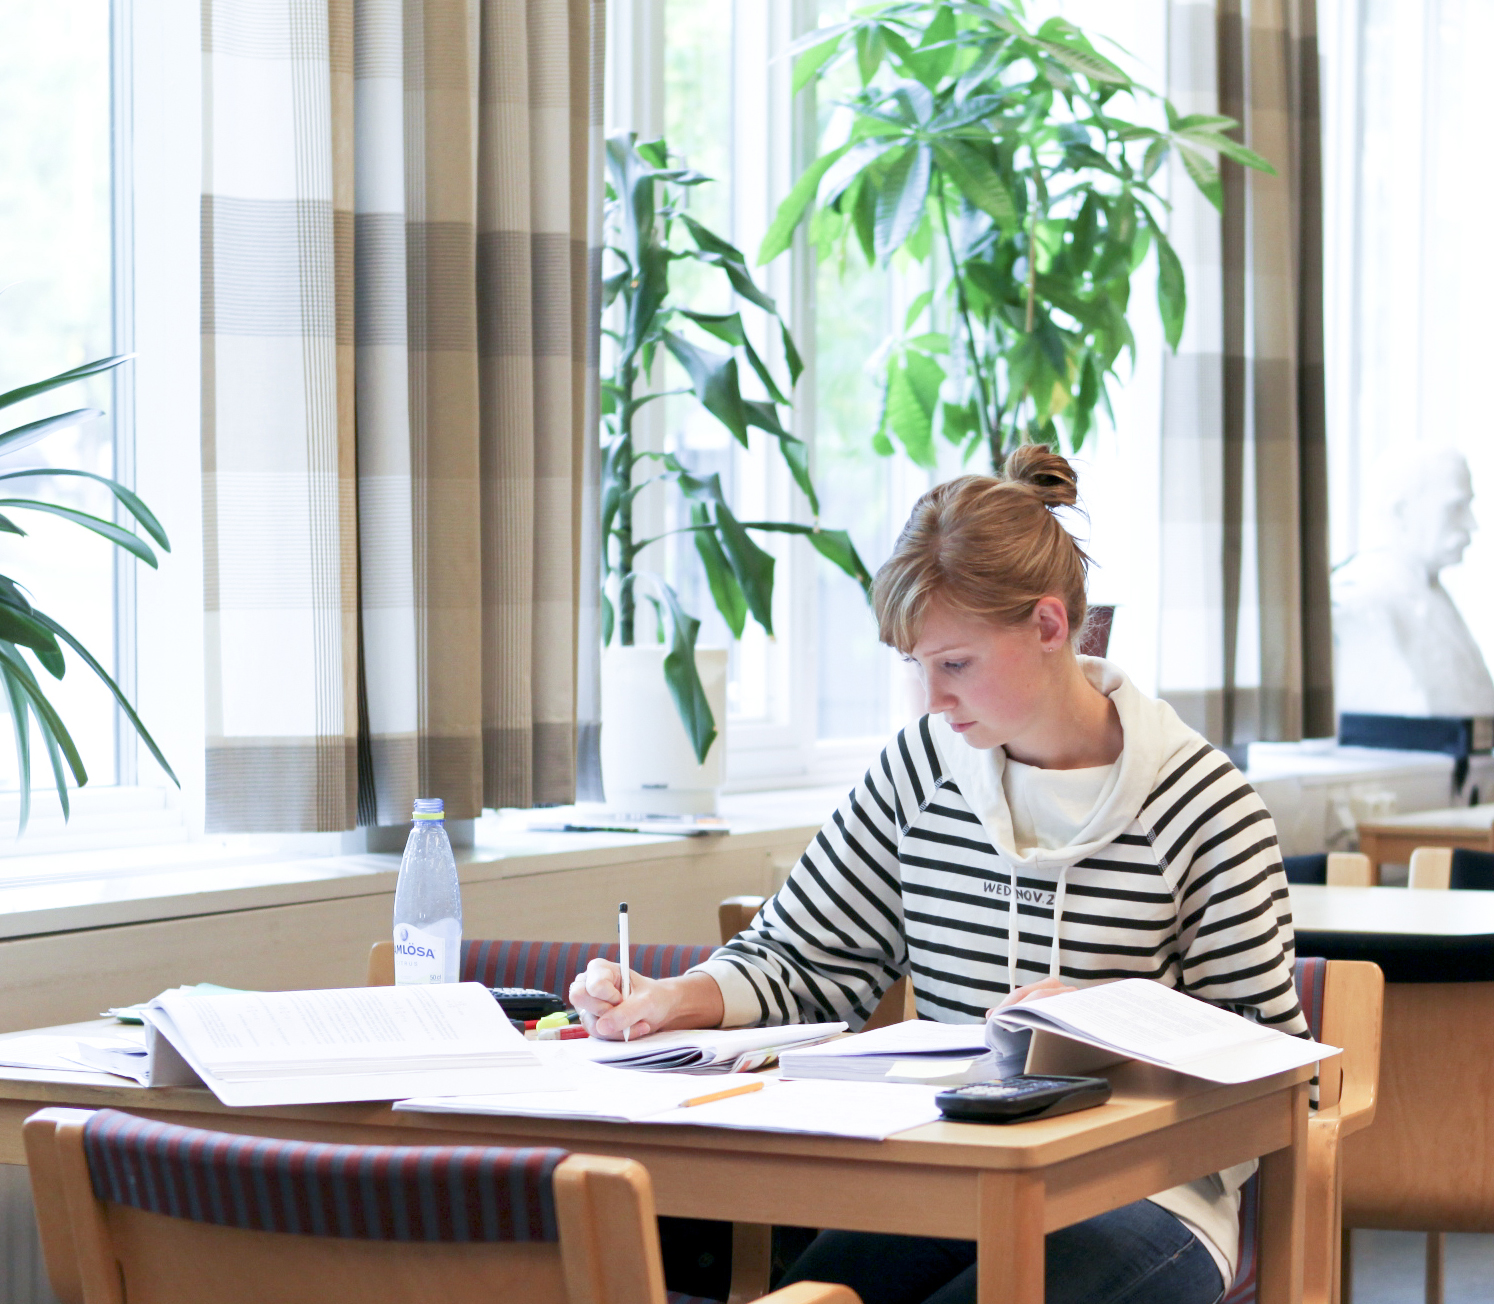 Female student studying in the library, photo.